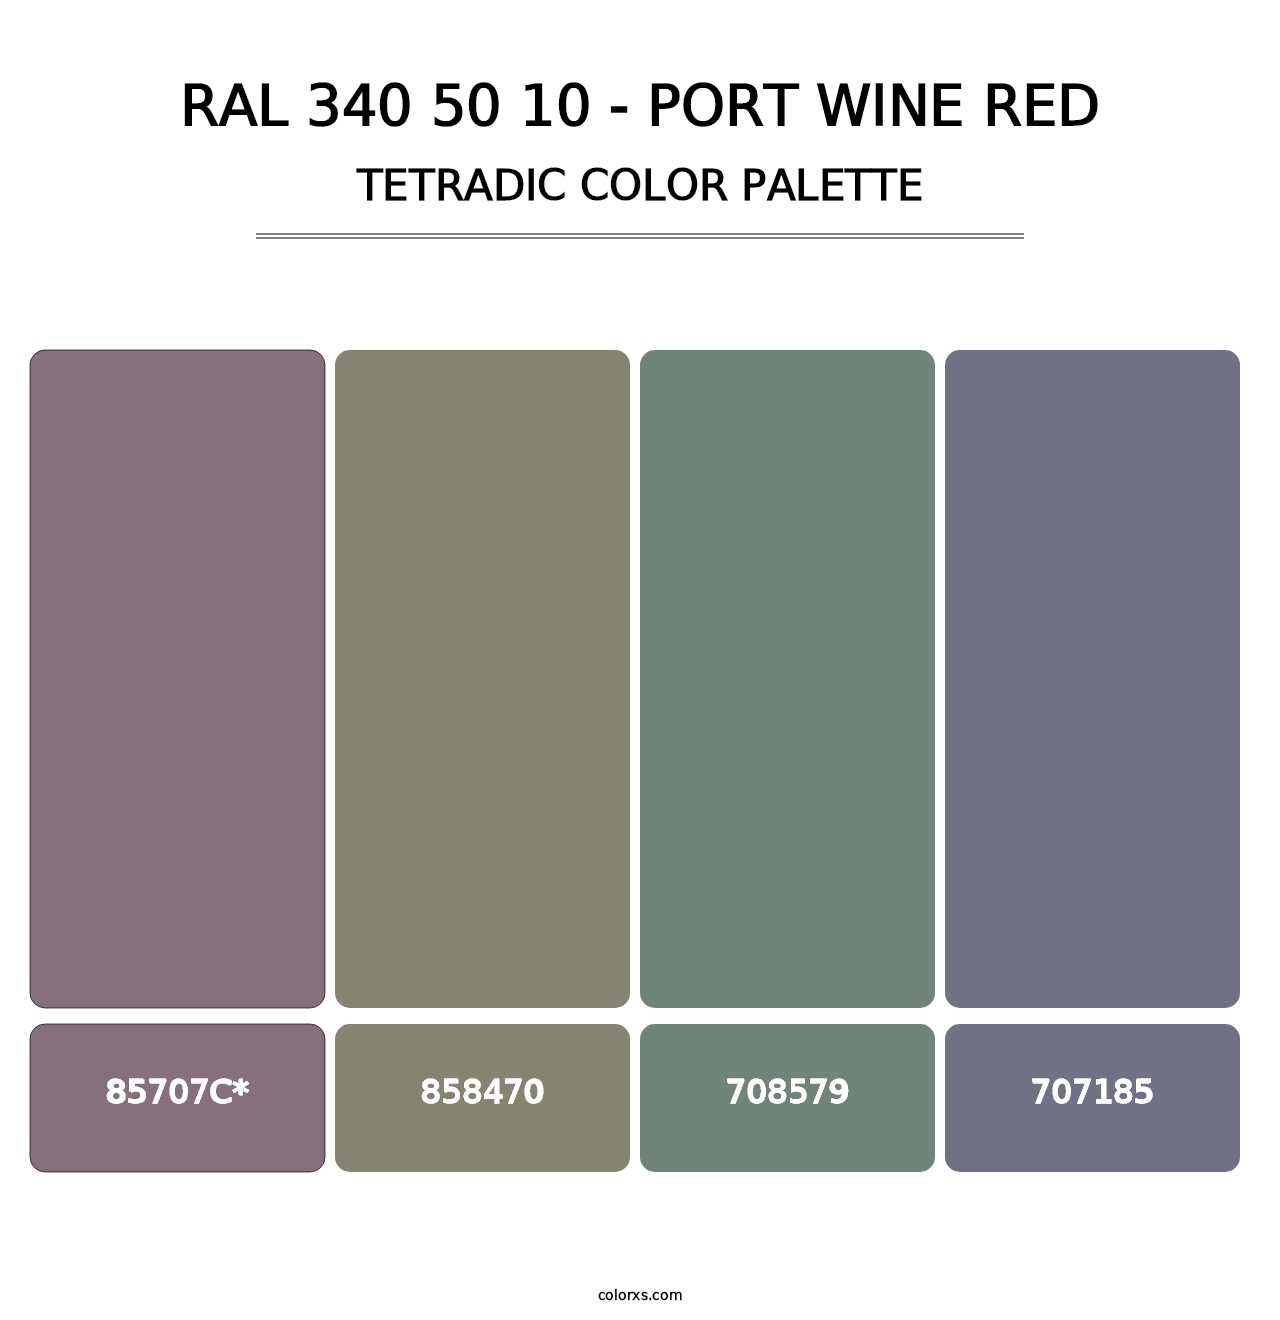 RAL 340 50 10 - Port Wine Red - Tetradic Color Palette